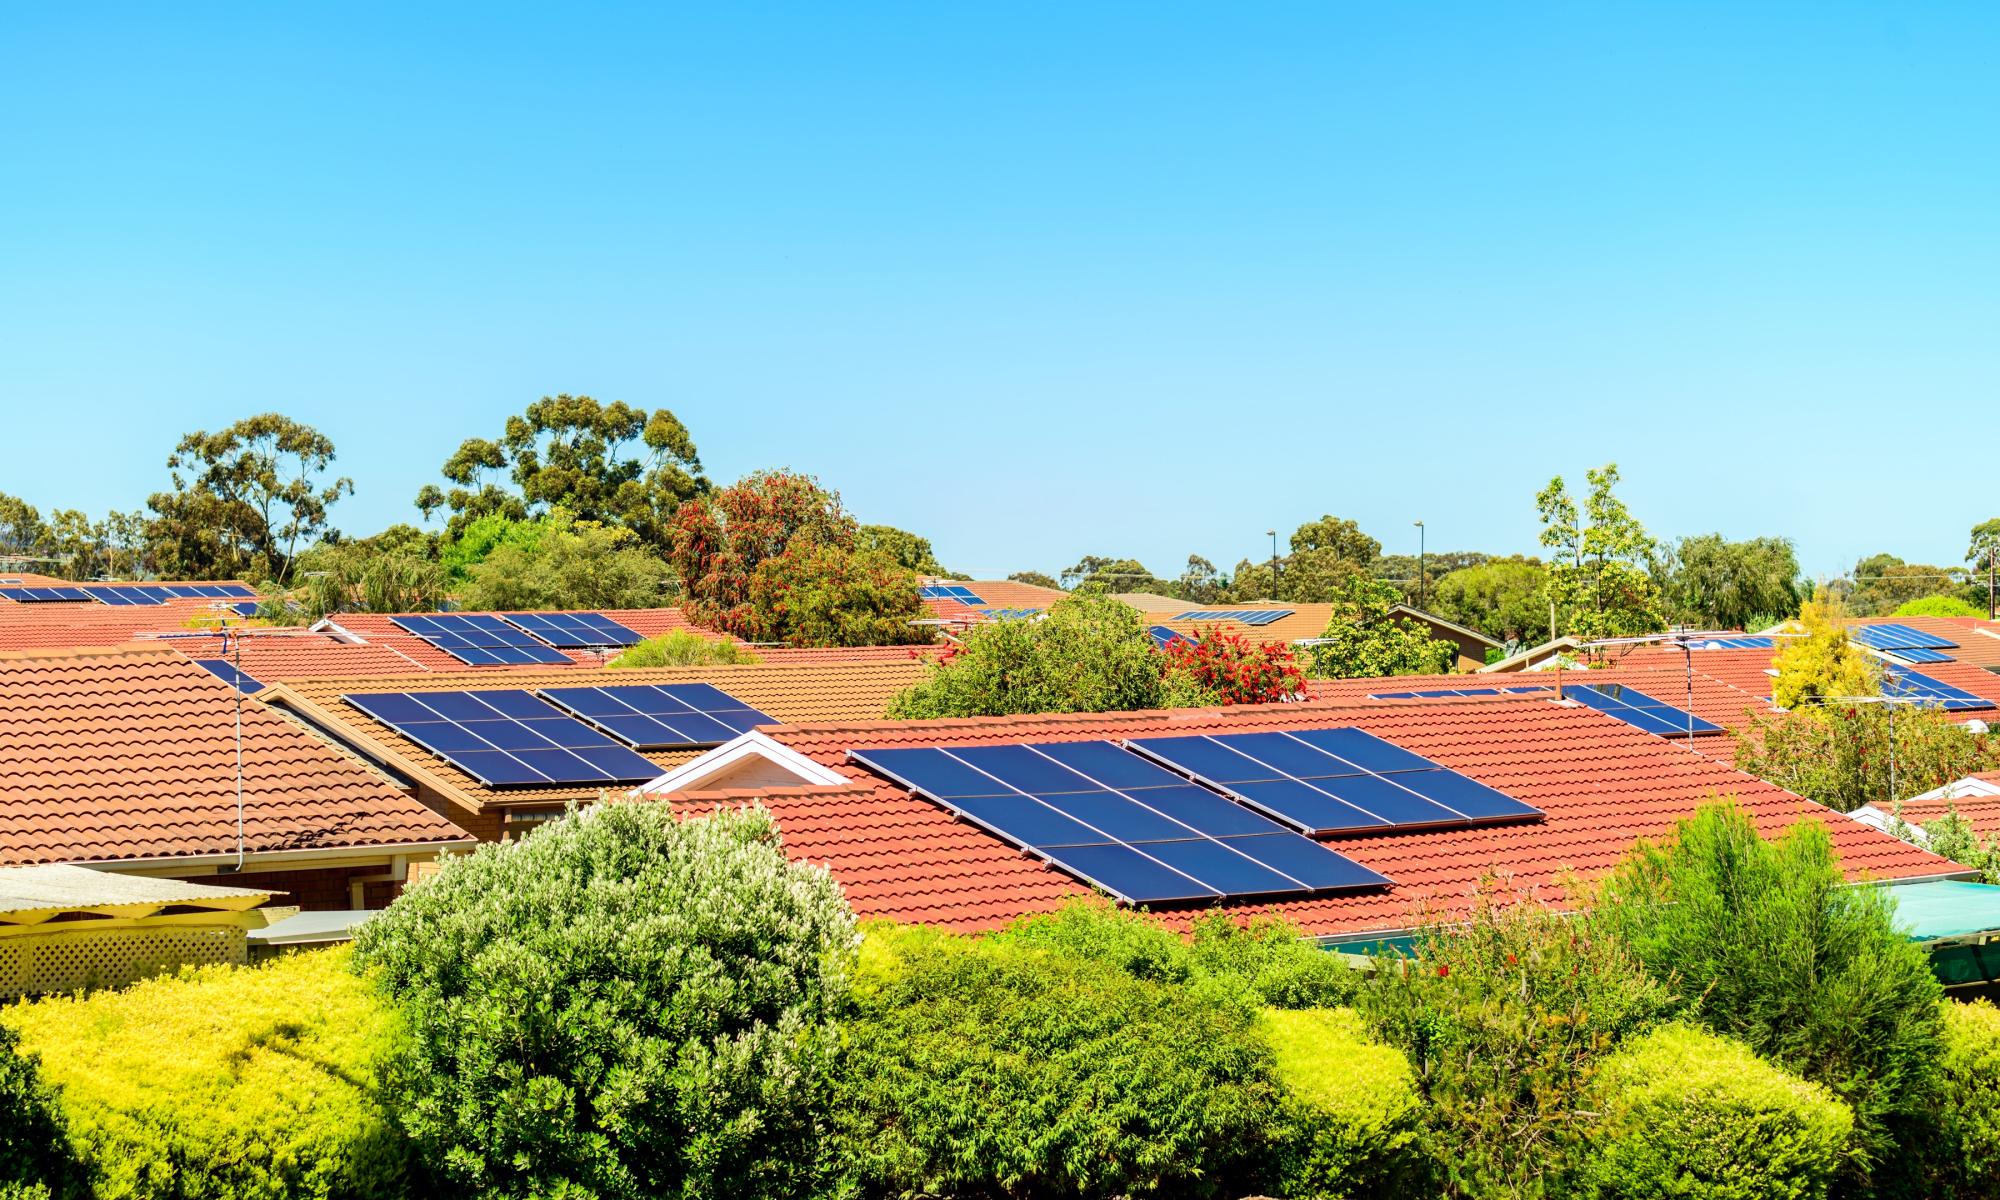 Australia could get 90% of electricity from renewables by 2040 with no price increase